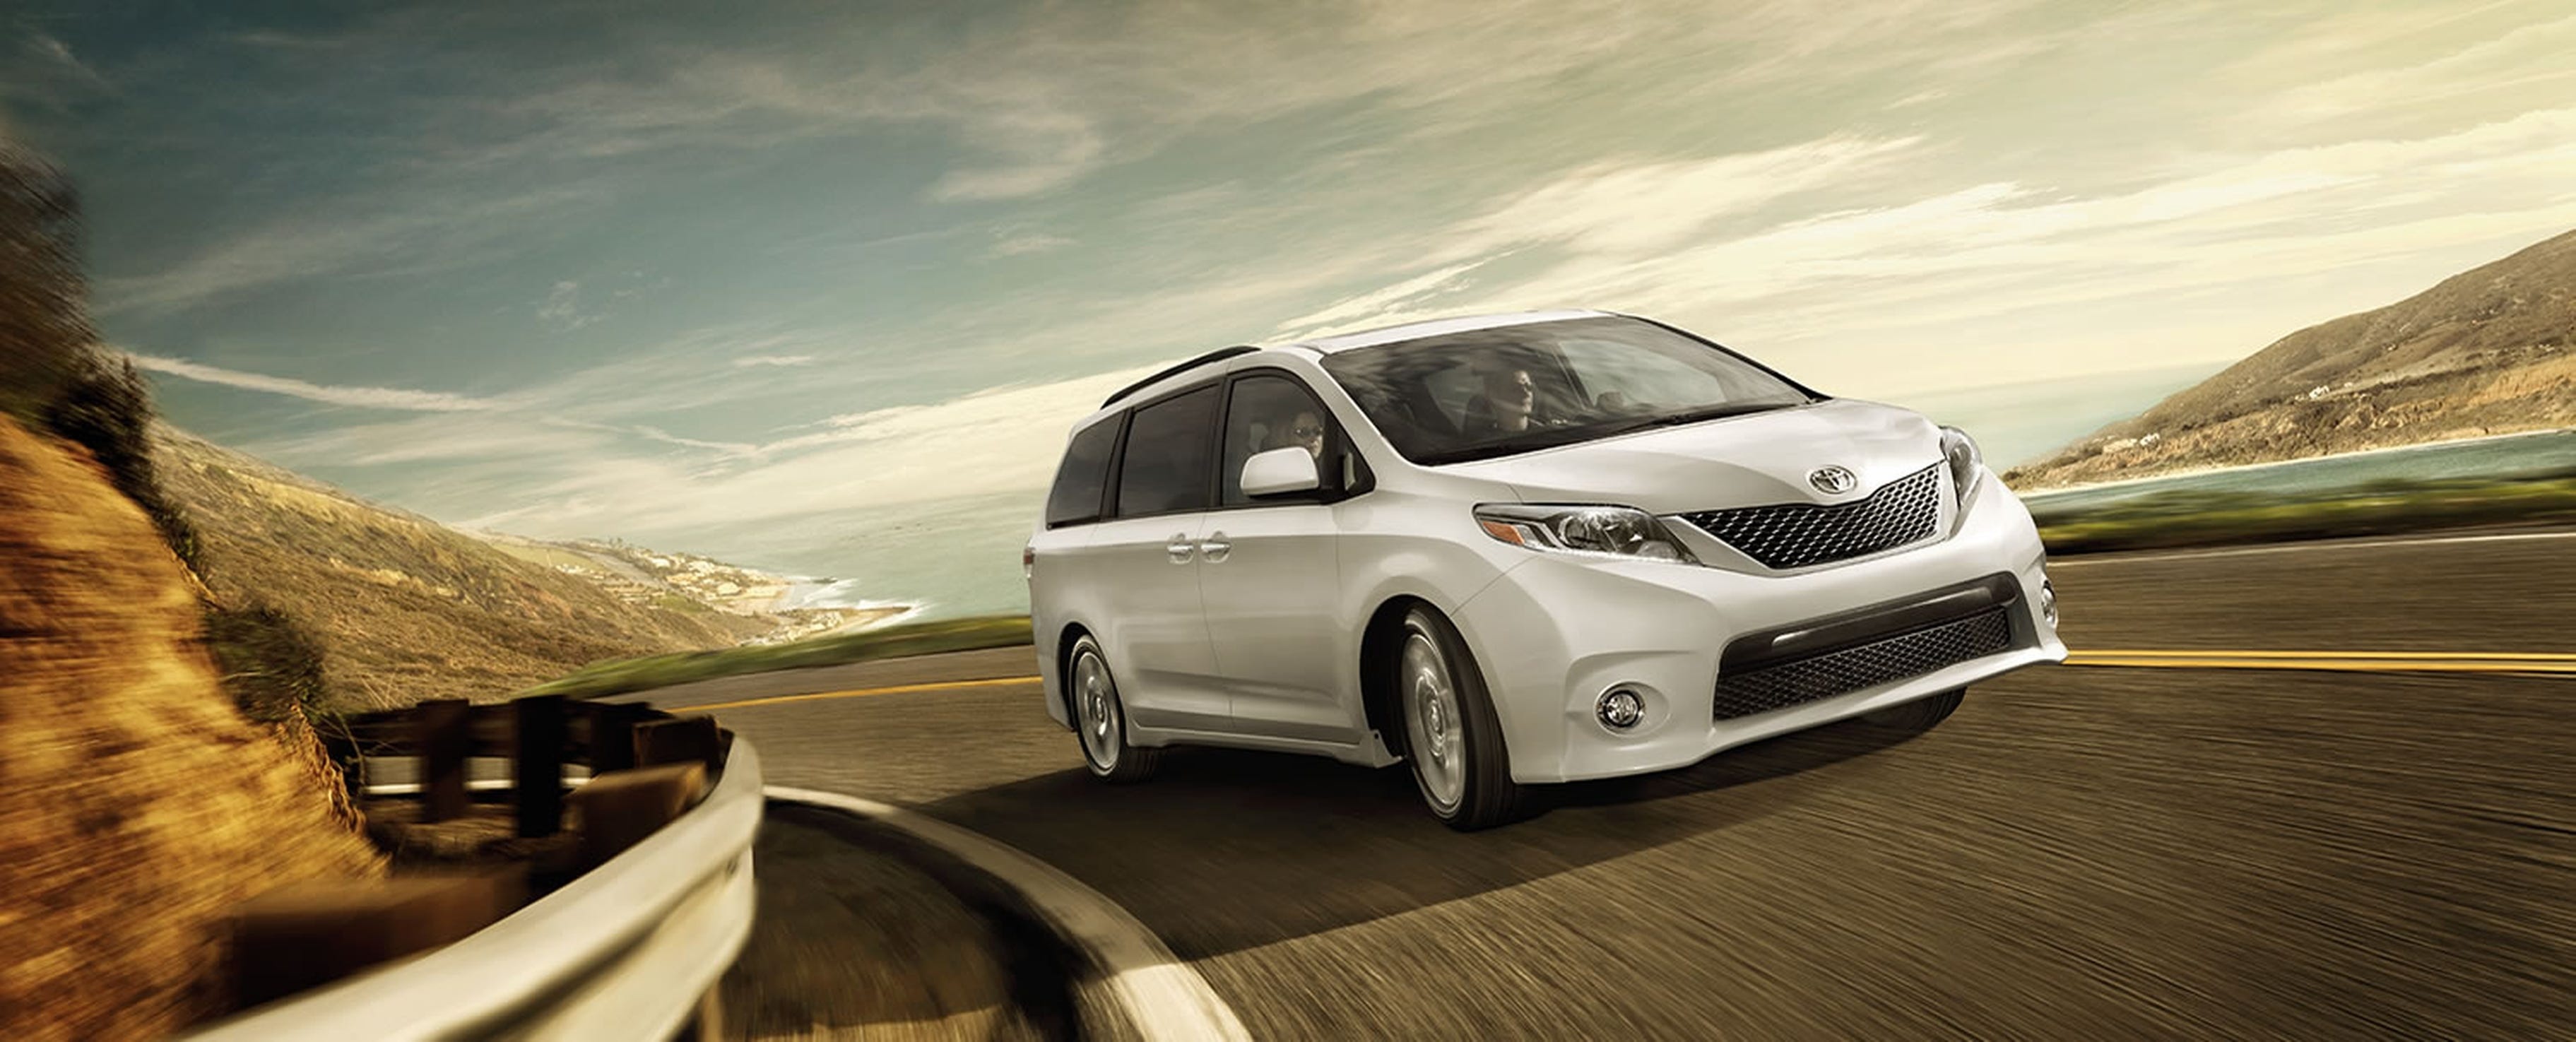 Toyota Sienna, Test drive, Safer and more stylish, 3650x1480 Dual Screen Desktop